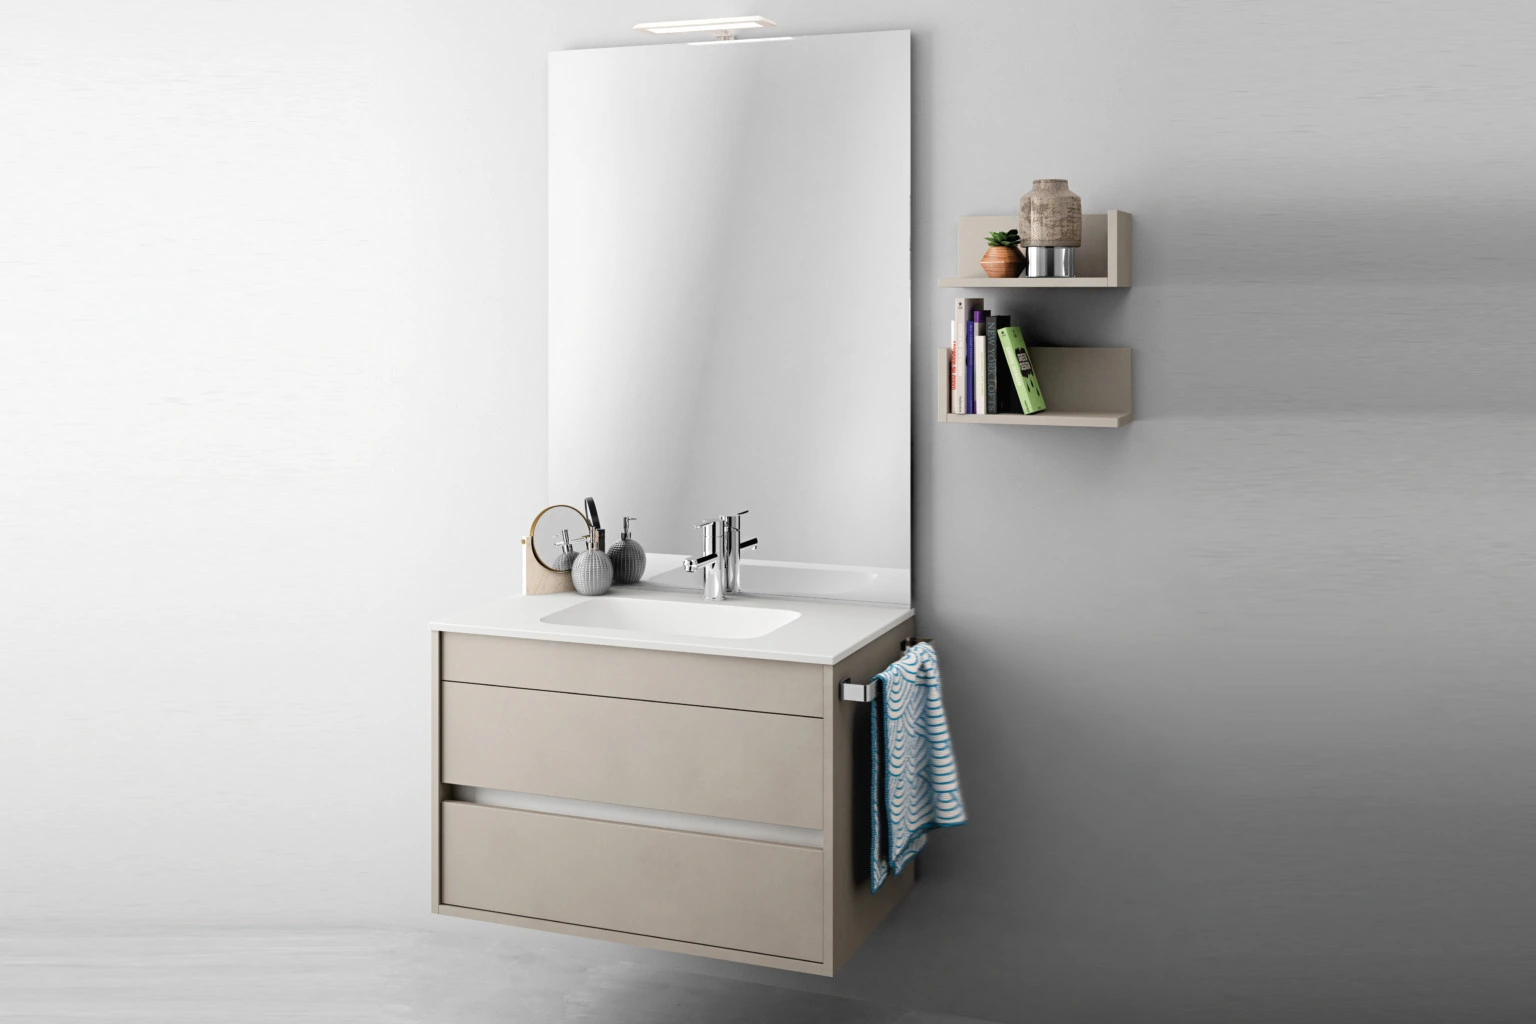 minimalist bathroom furniture with wall shelves duetto 8-1